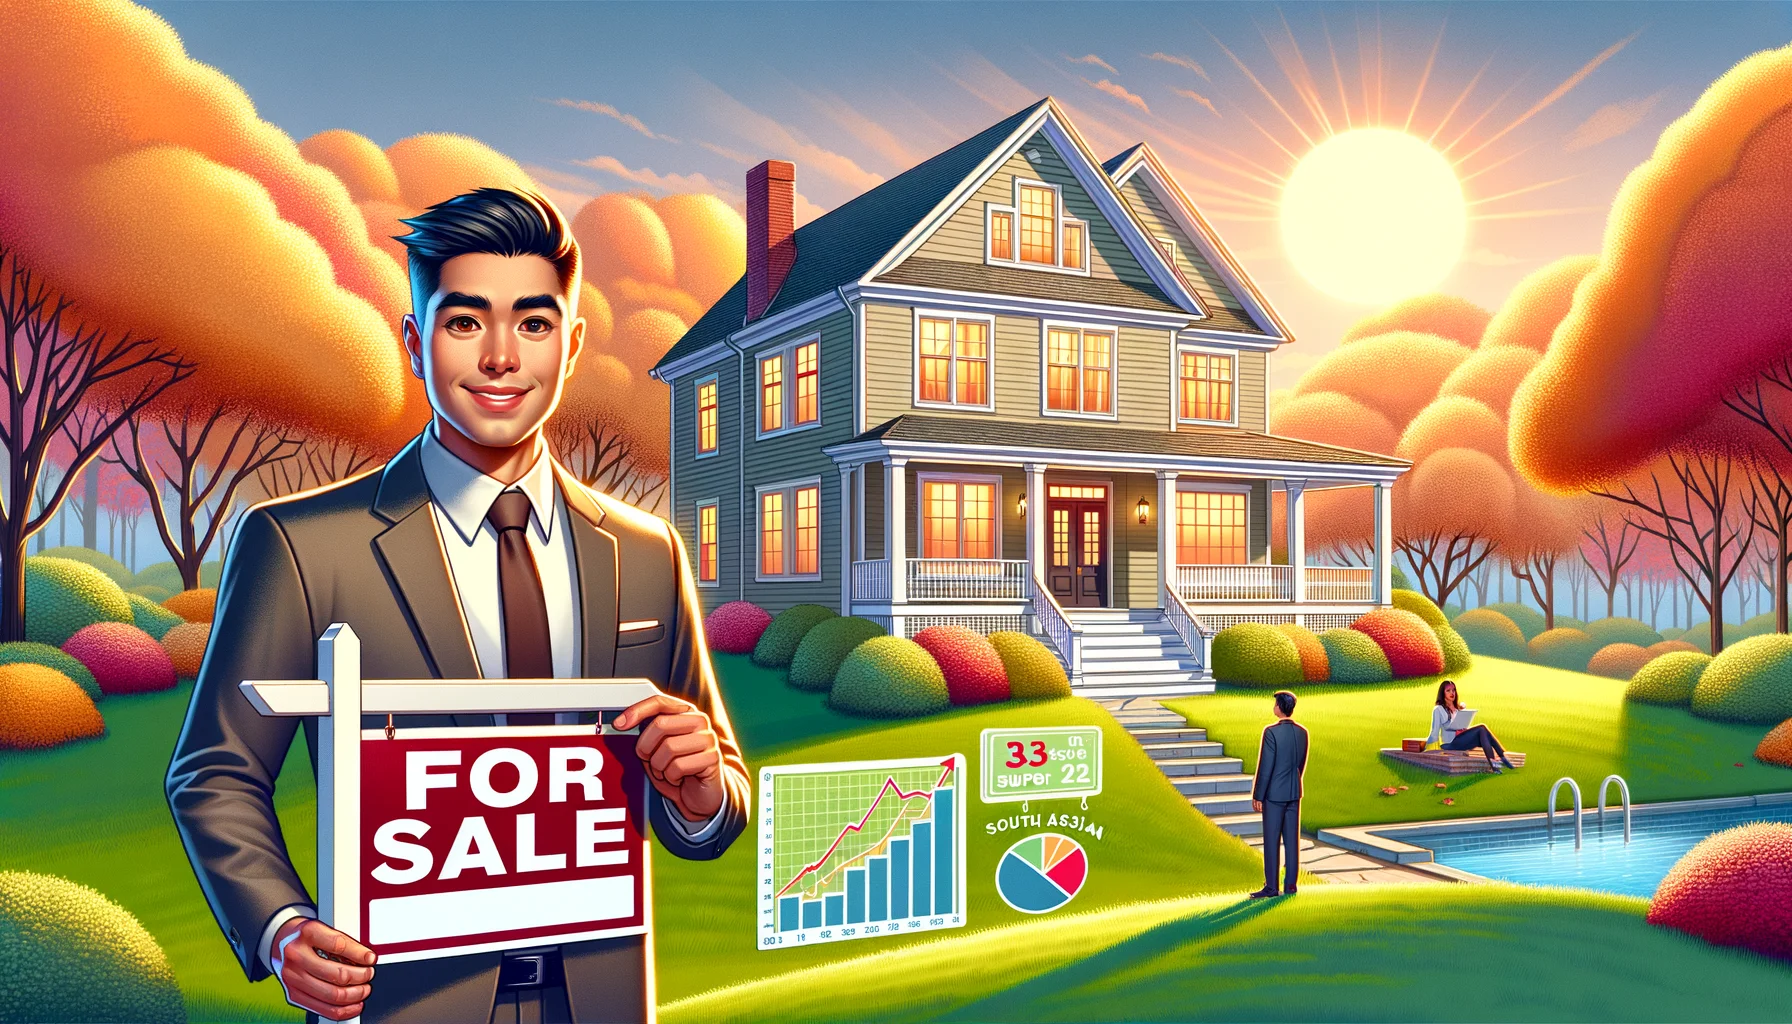 Generate an image showcasing the ideal scenario of Massachusetts real estate. Picture a sunlit traditional New England style house, with hues of white and taupe, surrounded by beautiful autumn trees. In the foreground, a 'For Sale' sign playfully tips in a mound of lush green grass. On one side, a smiling male Hispanic real estate agent in a smart business suit showcases the property. On the other side, a South Asian female potential buyer, looking impressed and excited. Include infographics around the image highlighting positive real estate trends in the region for a touch of humor.